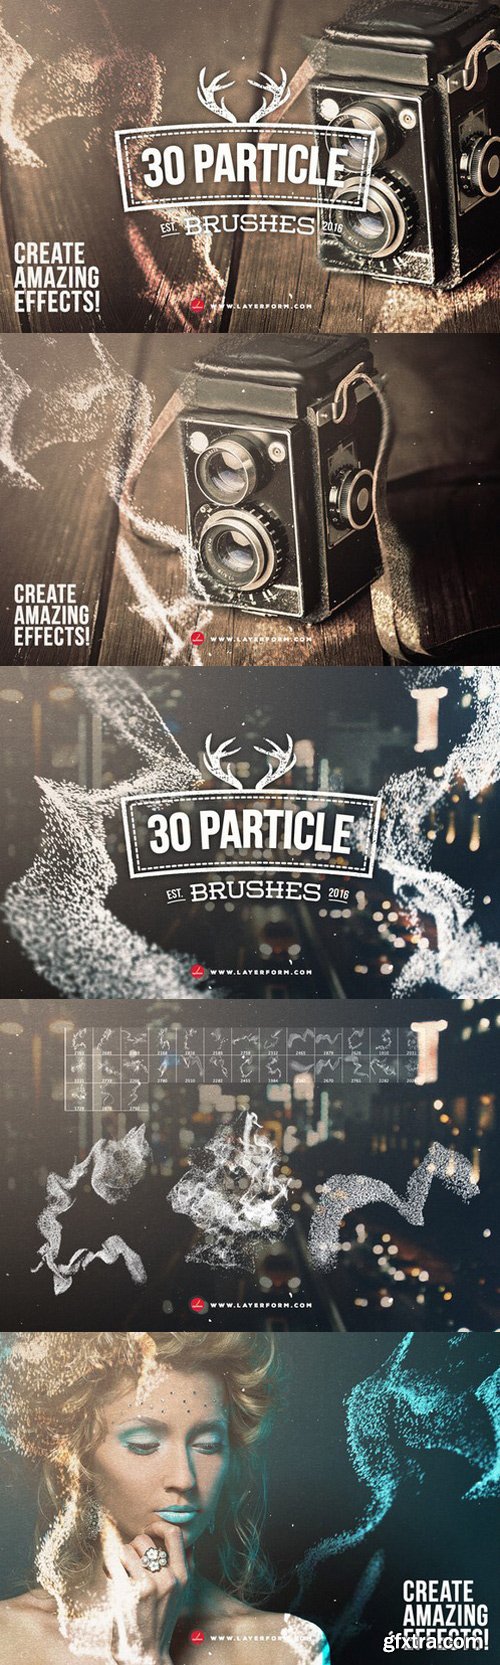 30 Particle Brushes